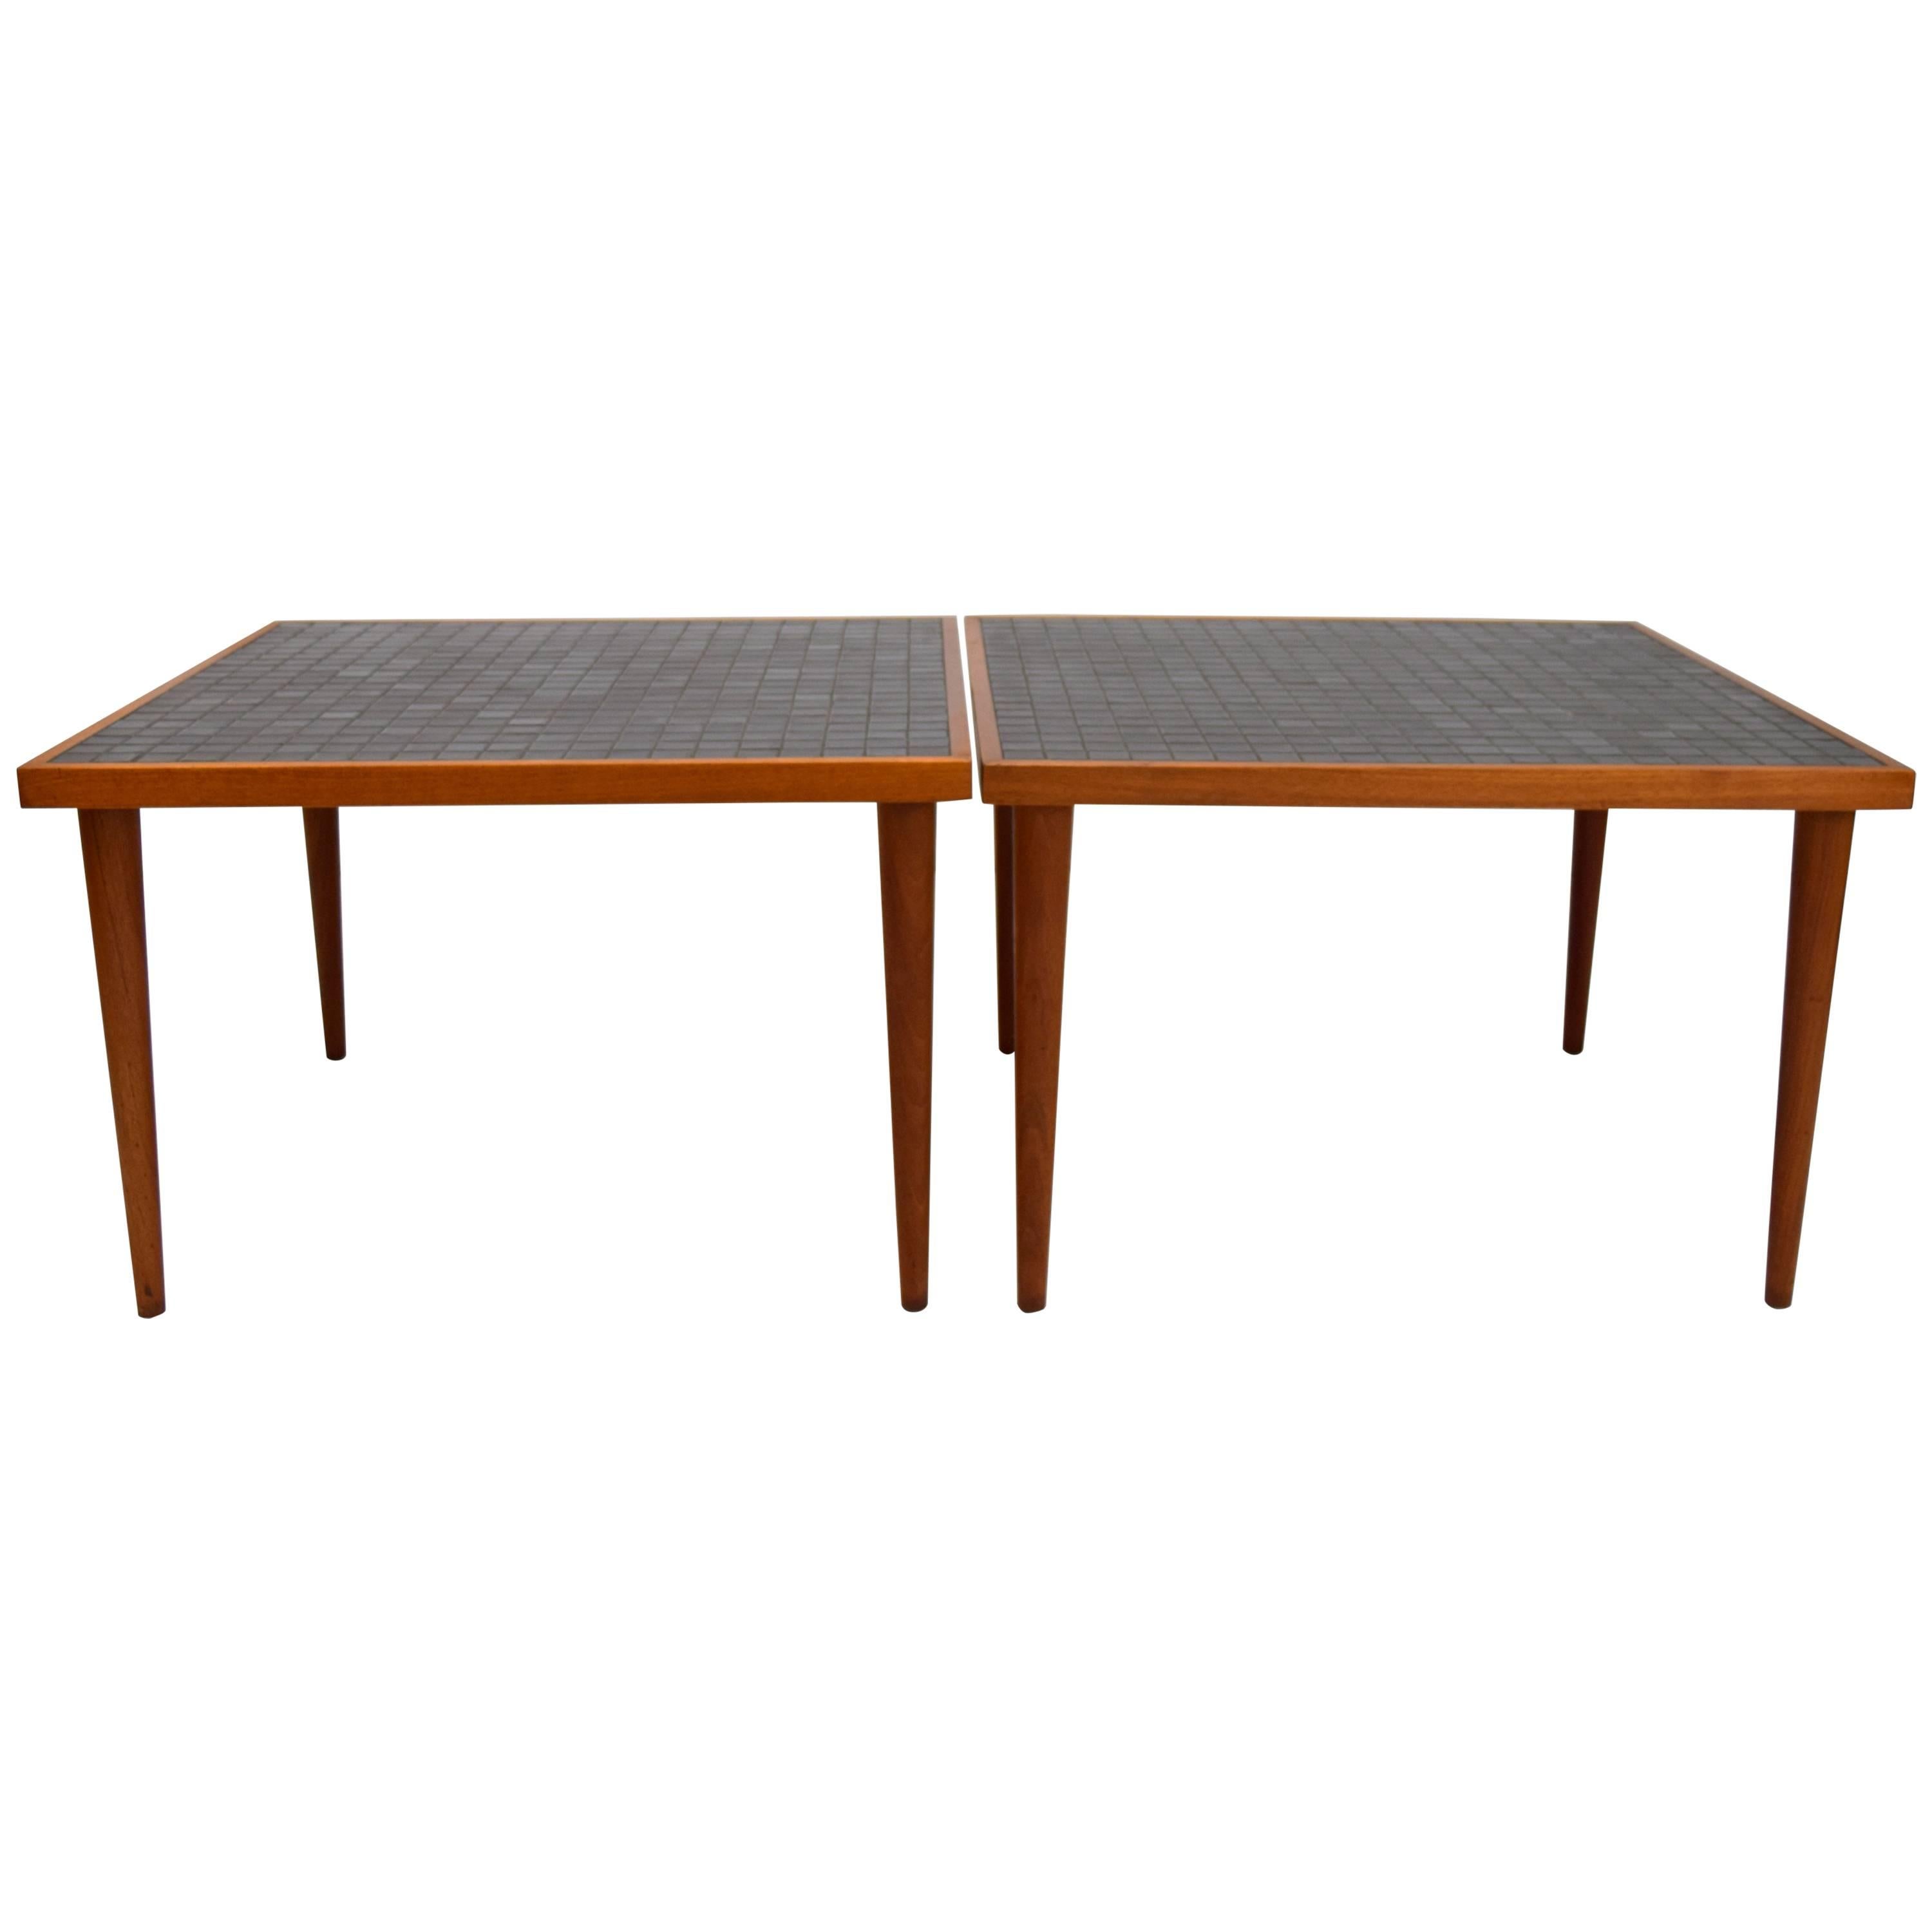 Pair of Martz Walnut and Tile End Tables for Marshall Studios For Sale